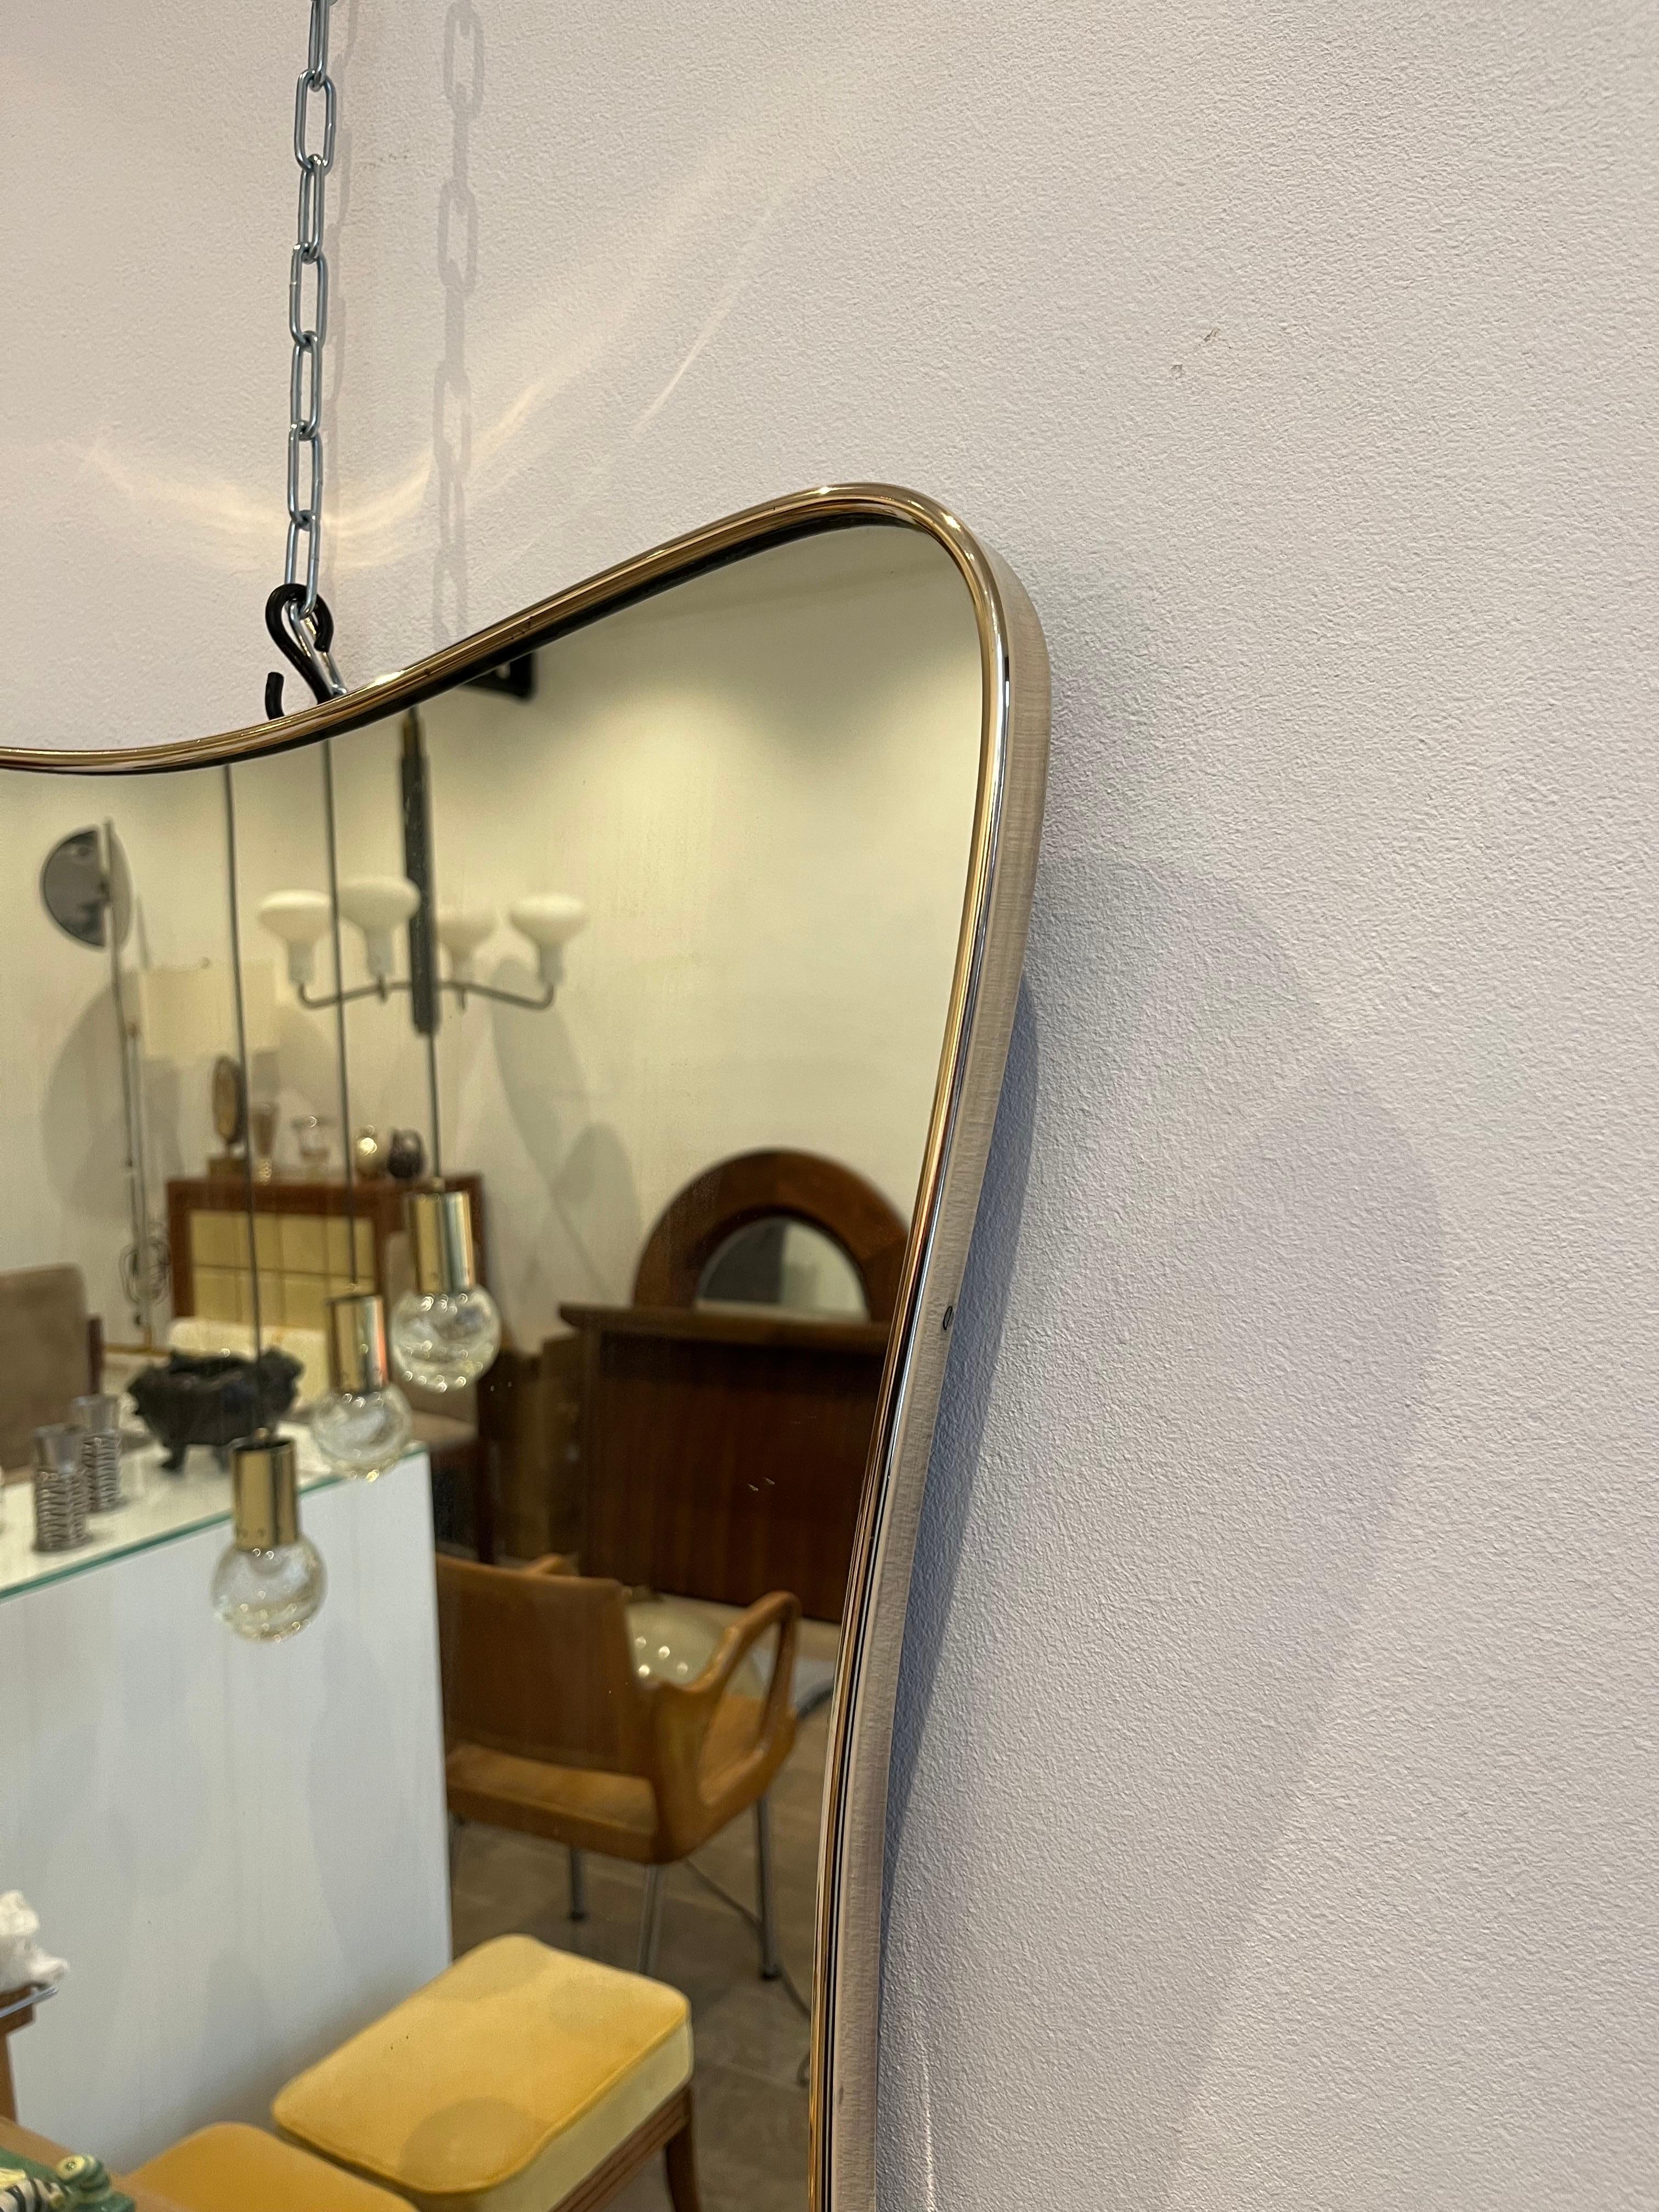 Mid-20th Century Italian Brass Mirror Attributed to Gio Ponti, 1950s For Sale